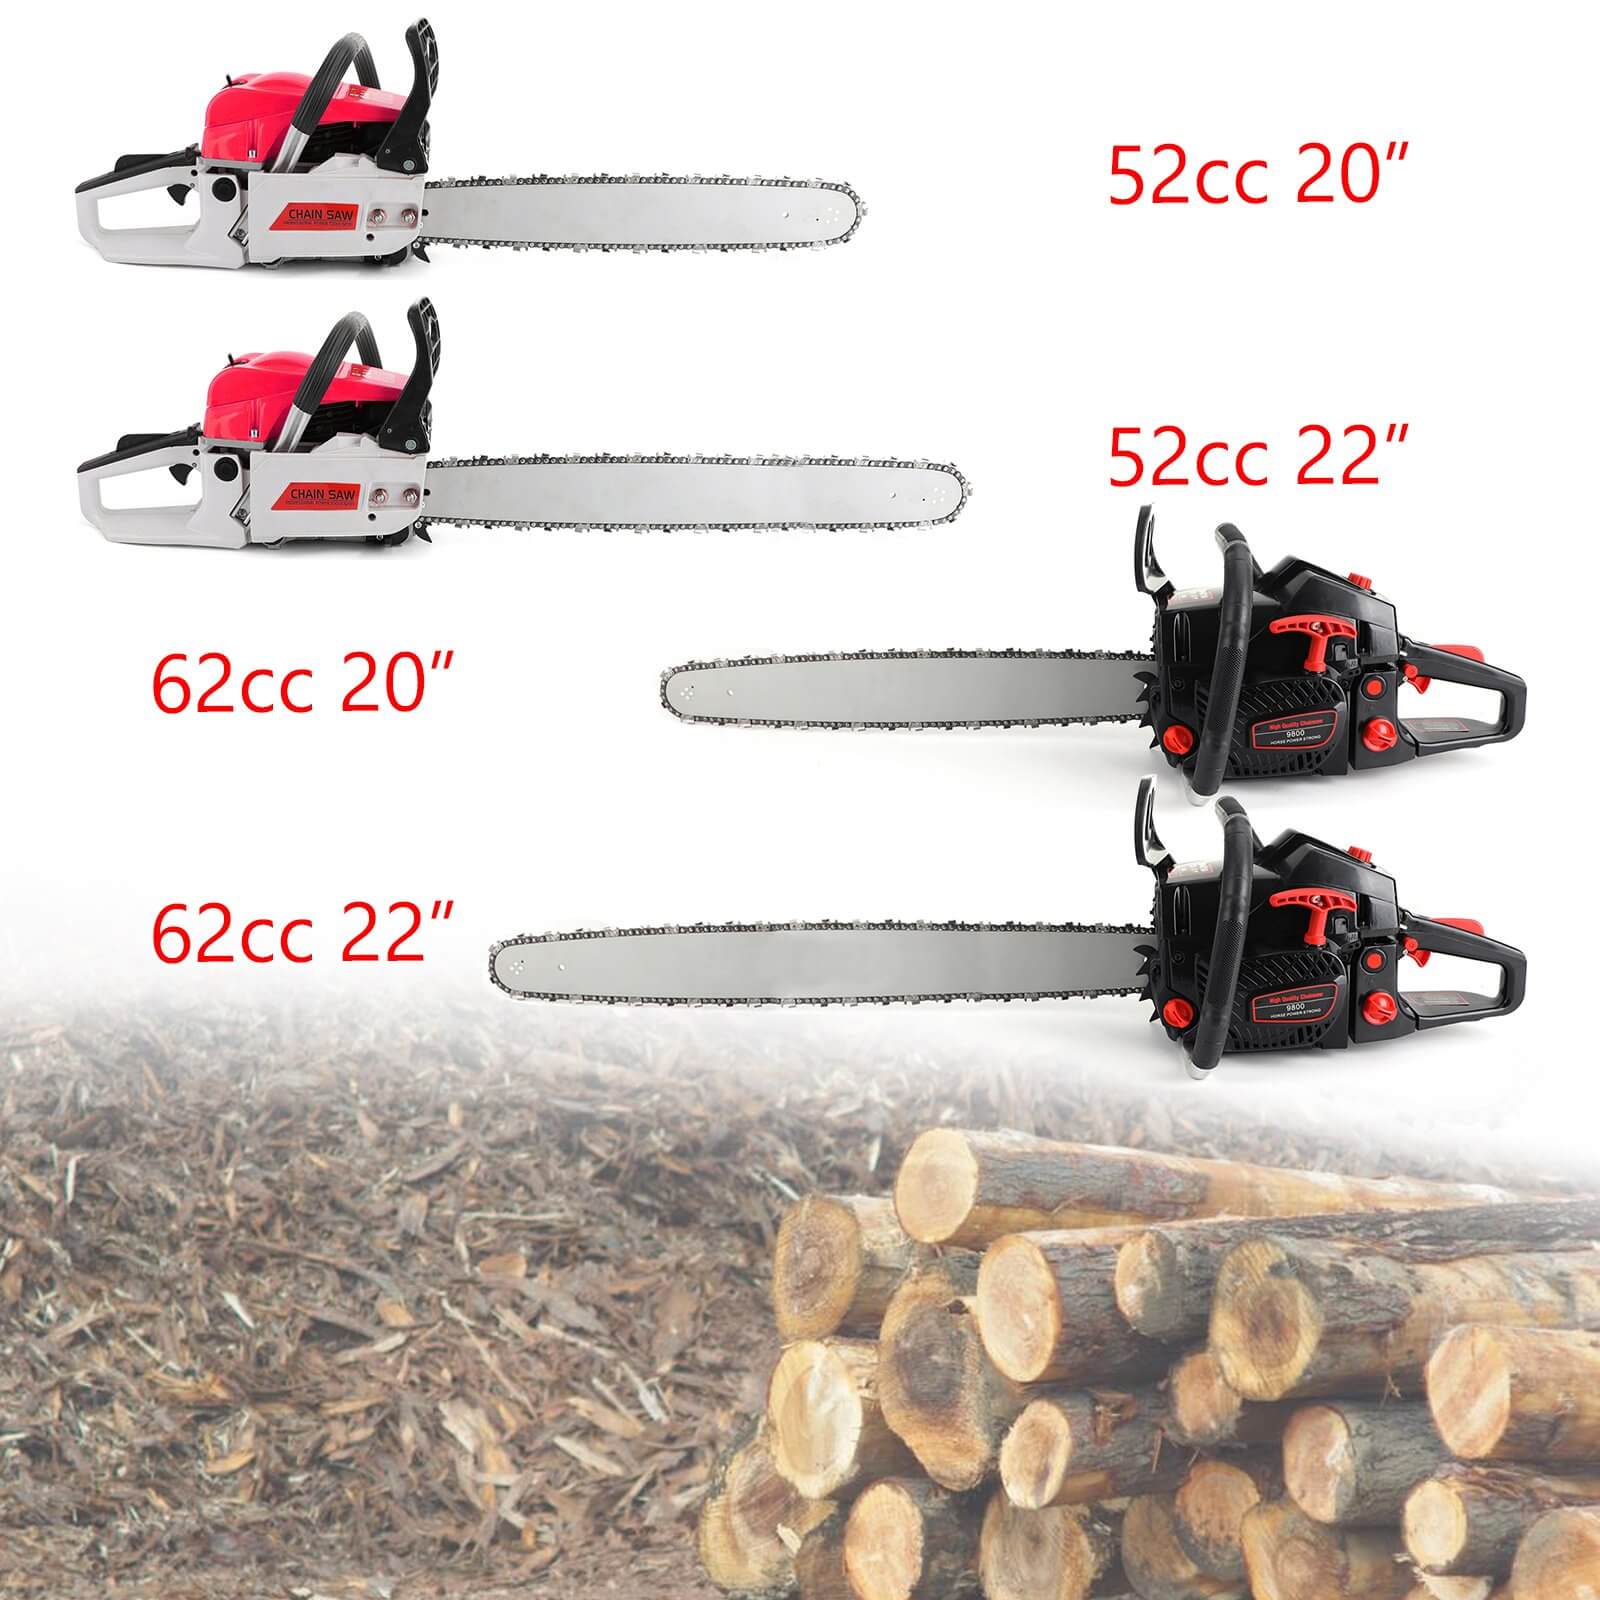 Hot Selling 52cc/62cc Chainsaw 20"/22" Bar Gasoline Chain Saw For Sale